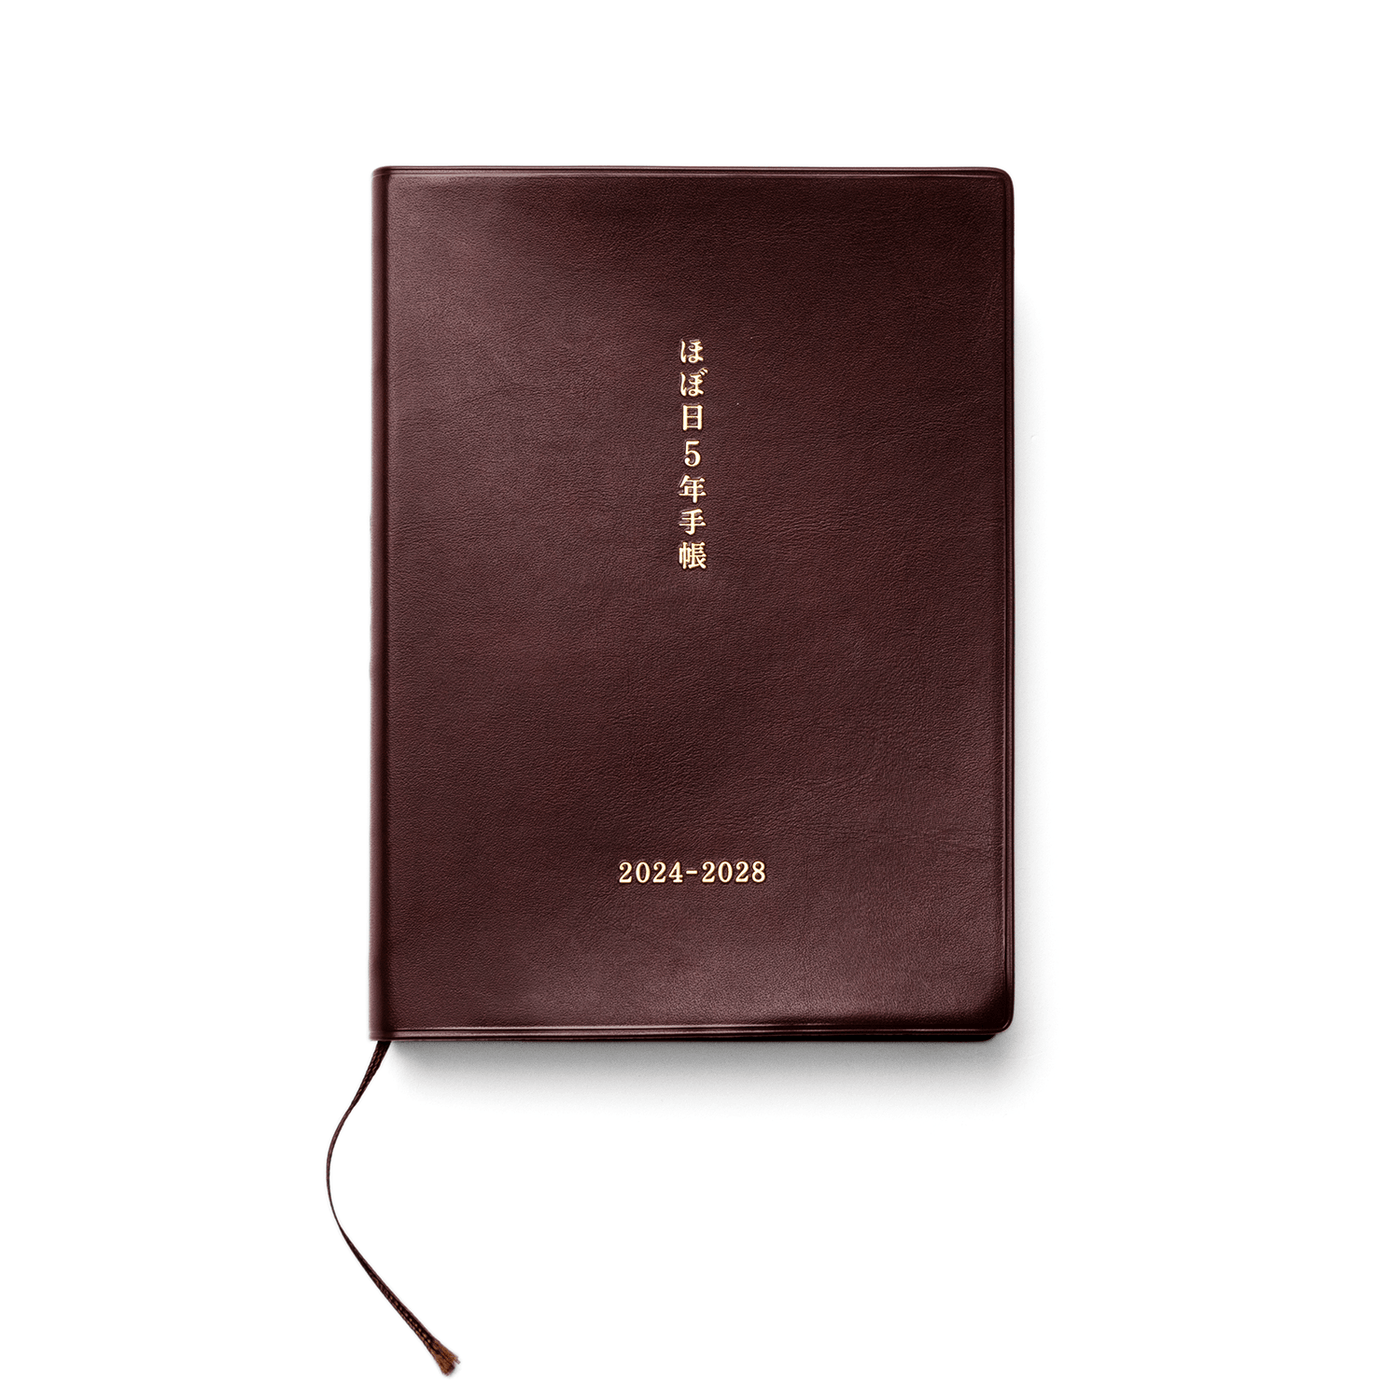 Hobonichi 5-Year Key Planner Cover (A6)